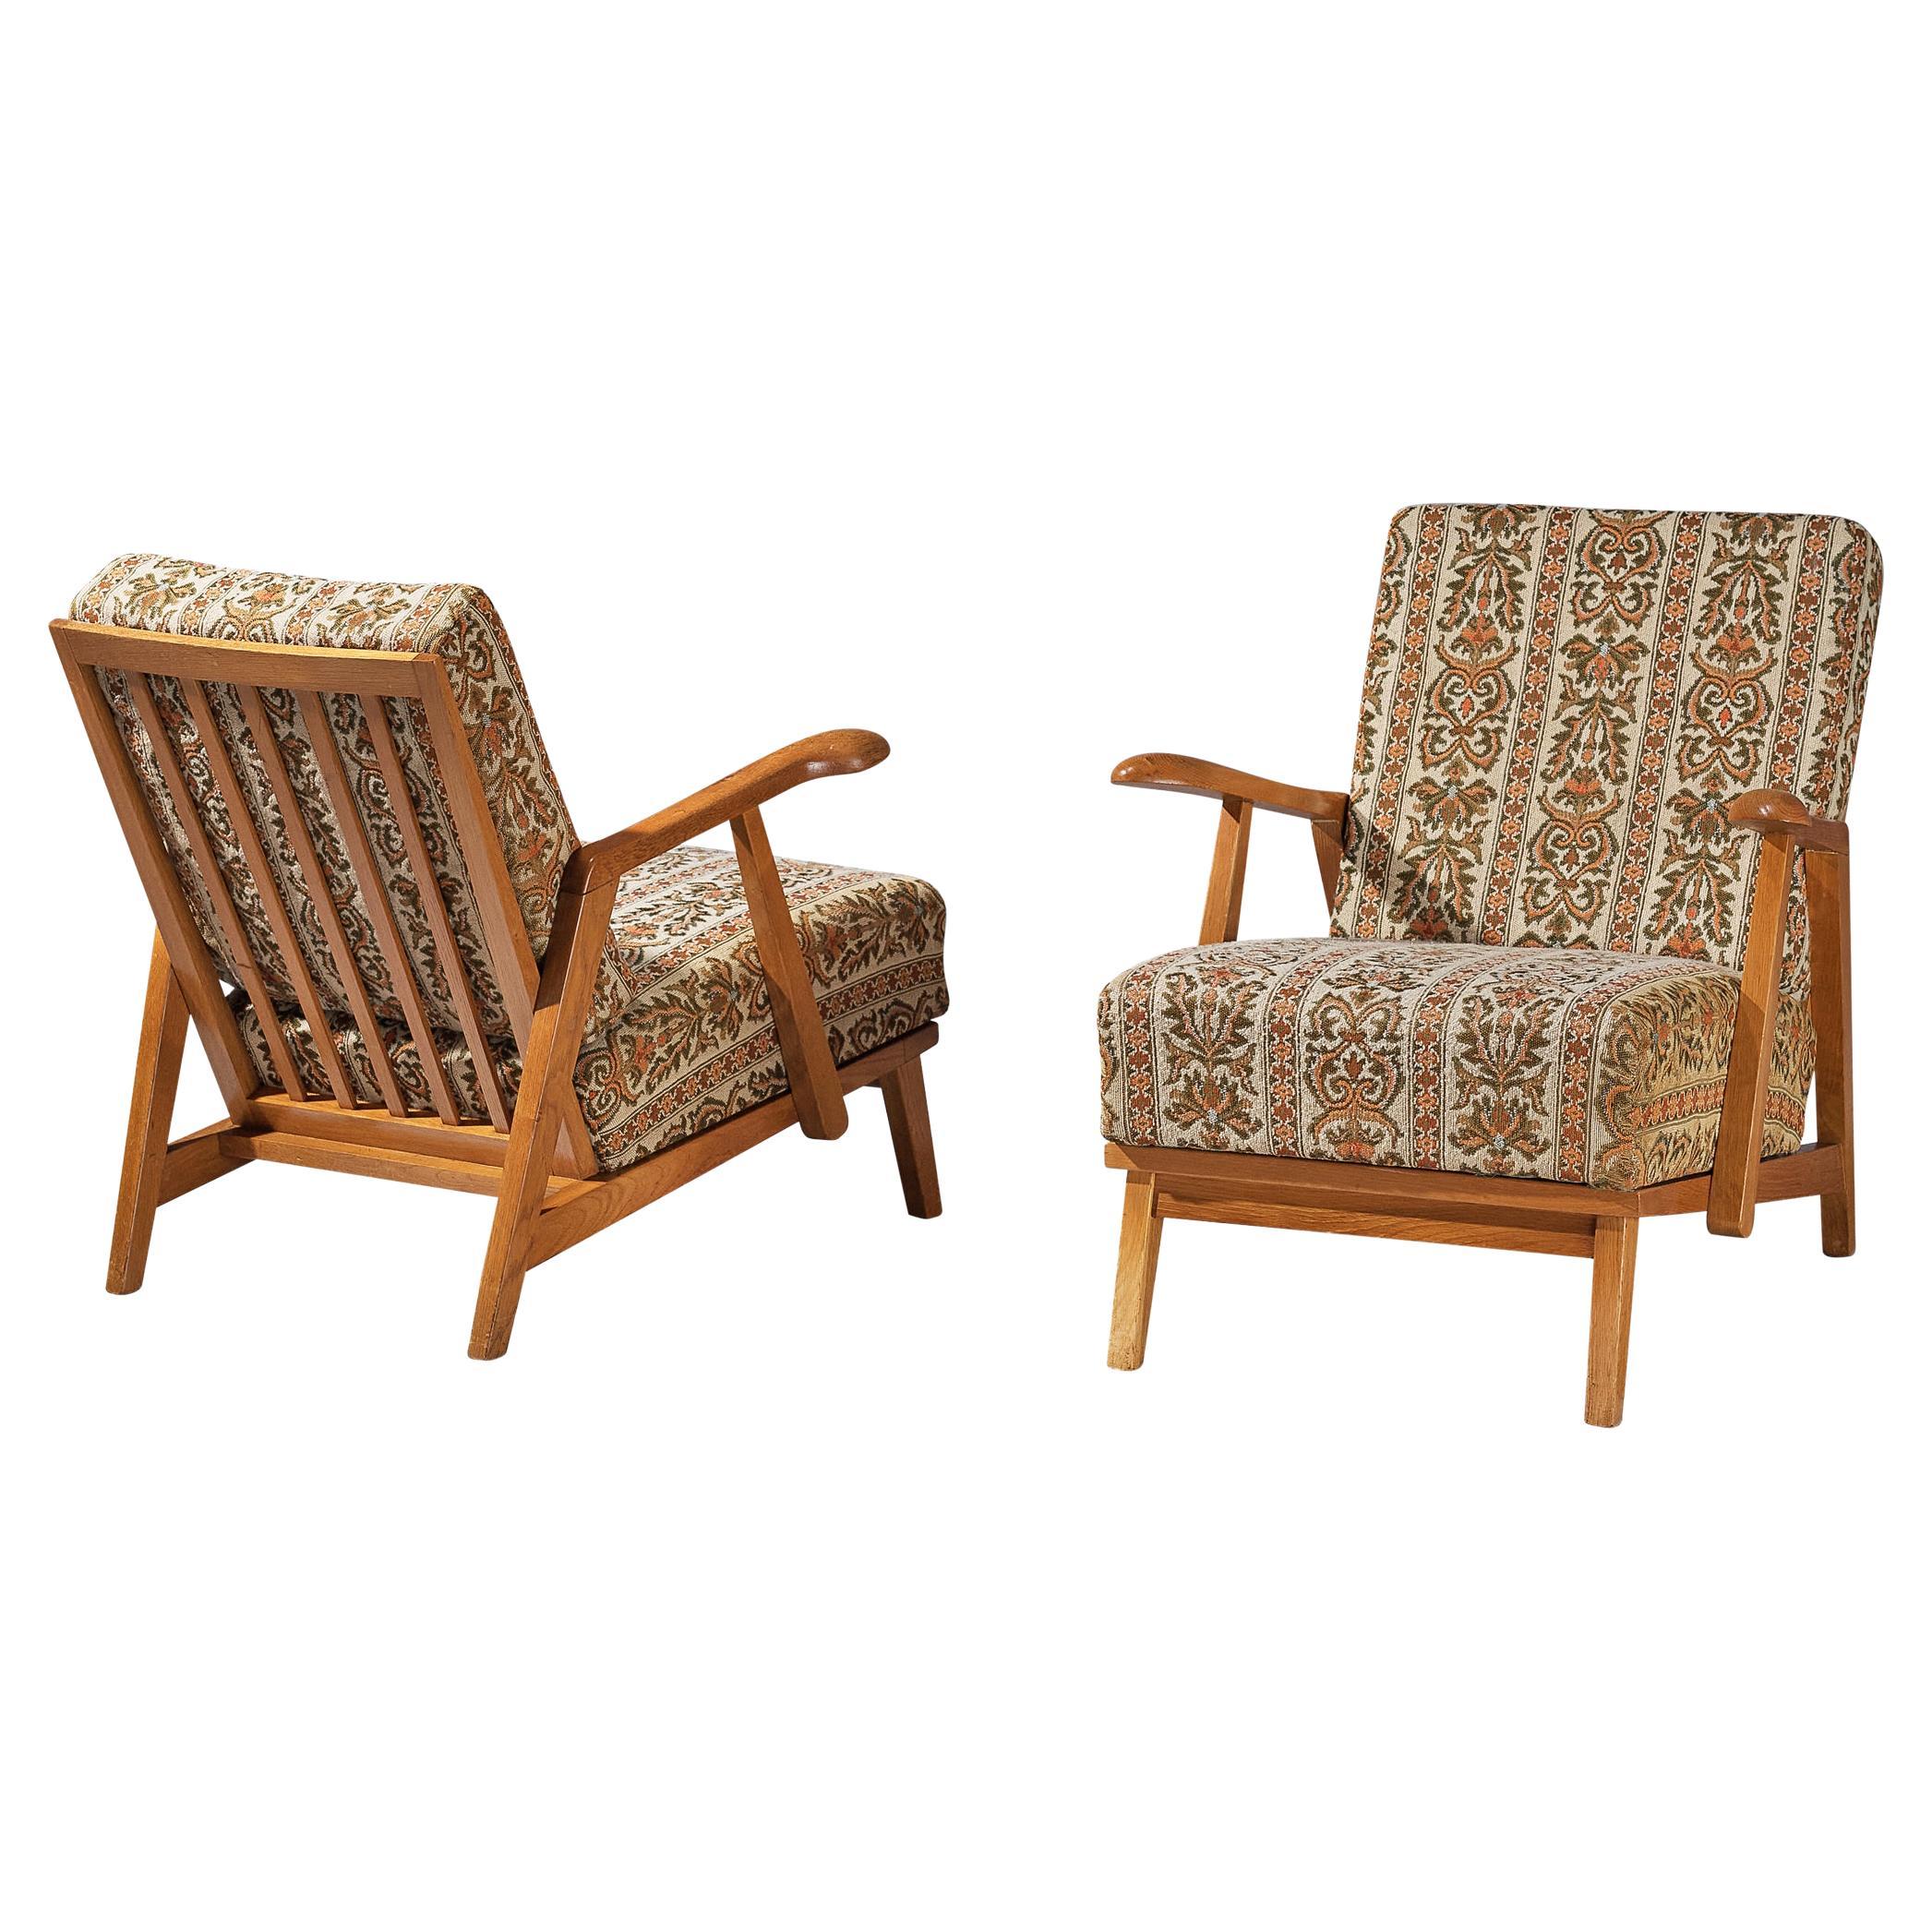 Pair of Lounge Chairs in Oak with Slatted Backs